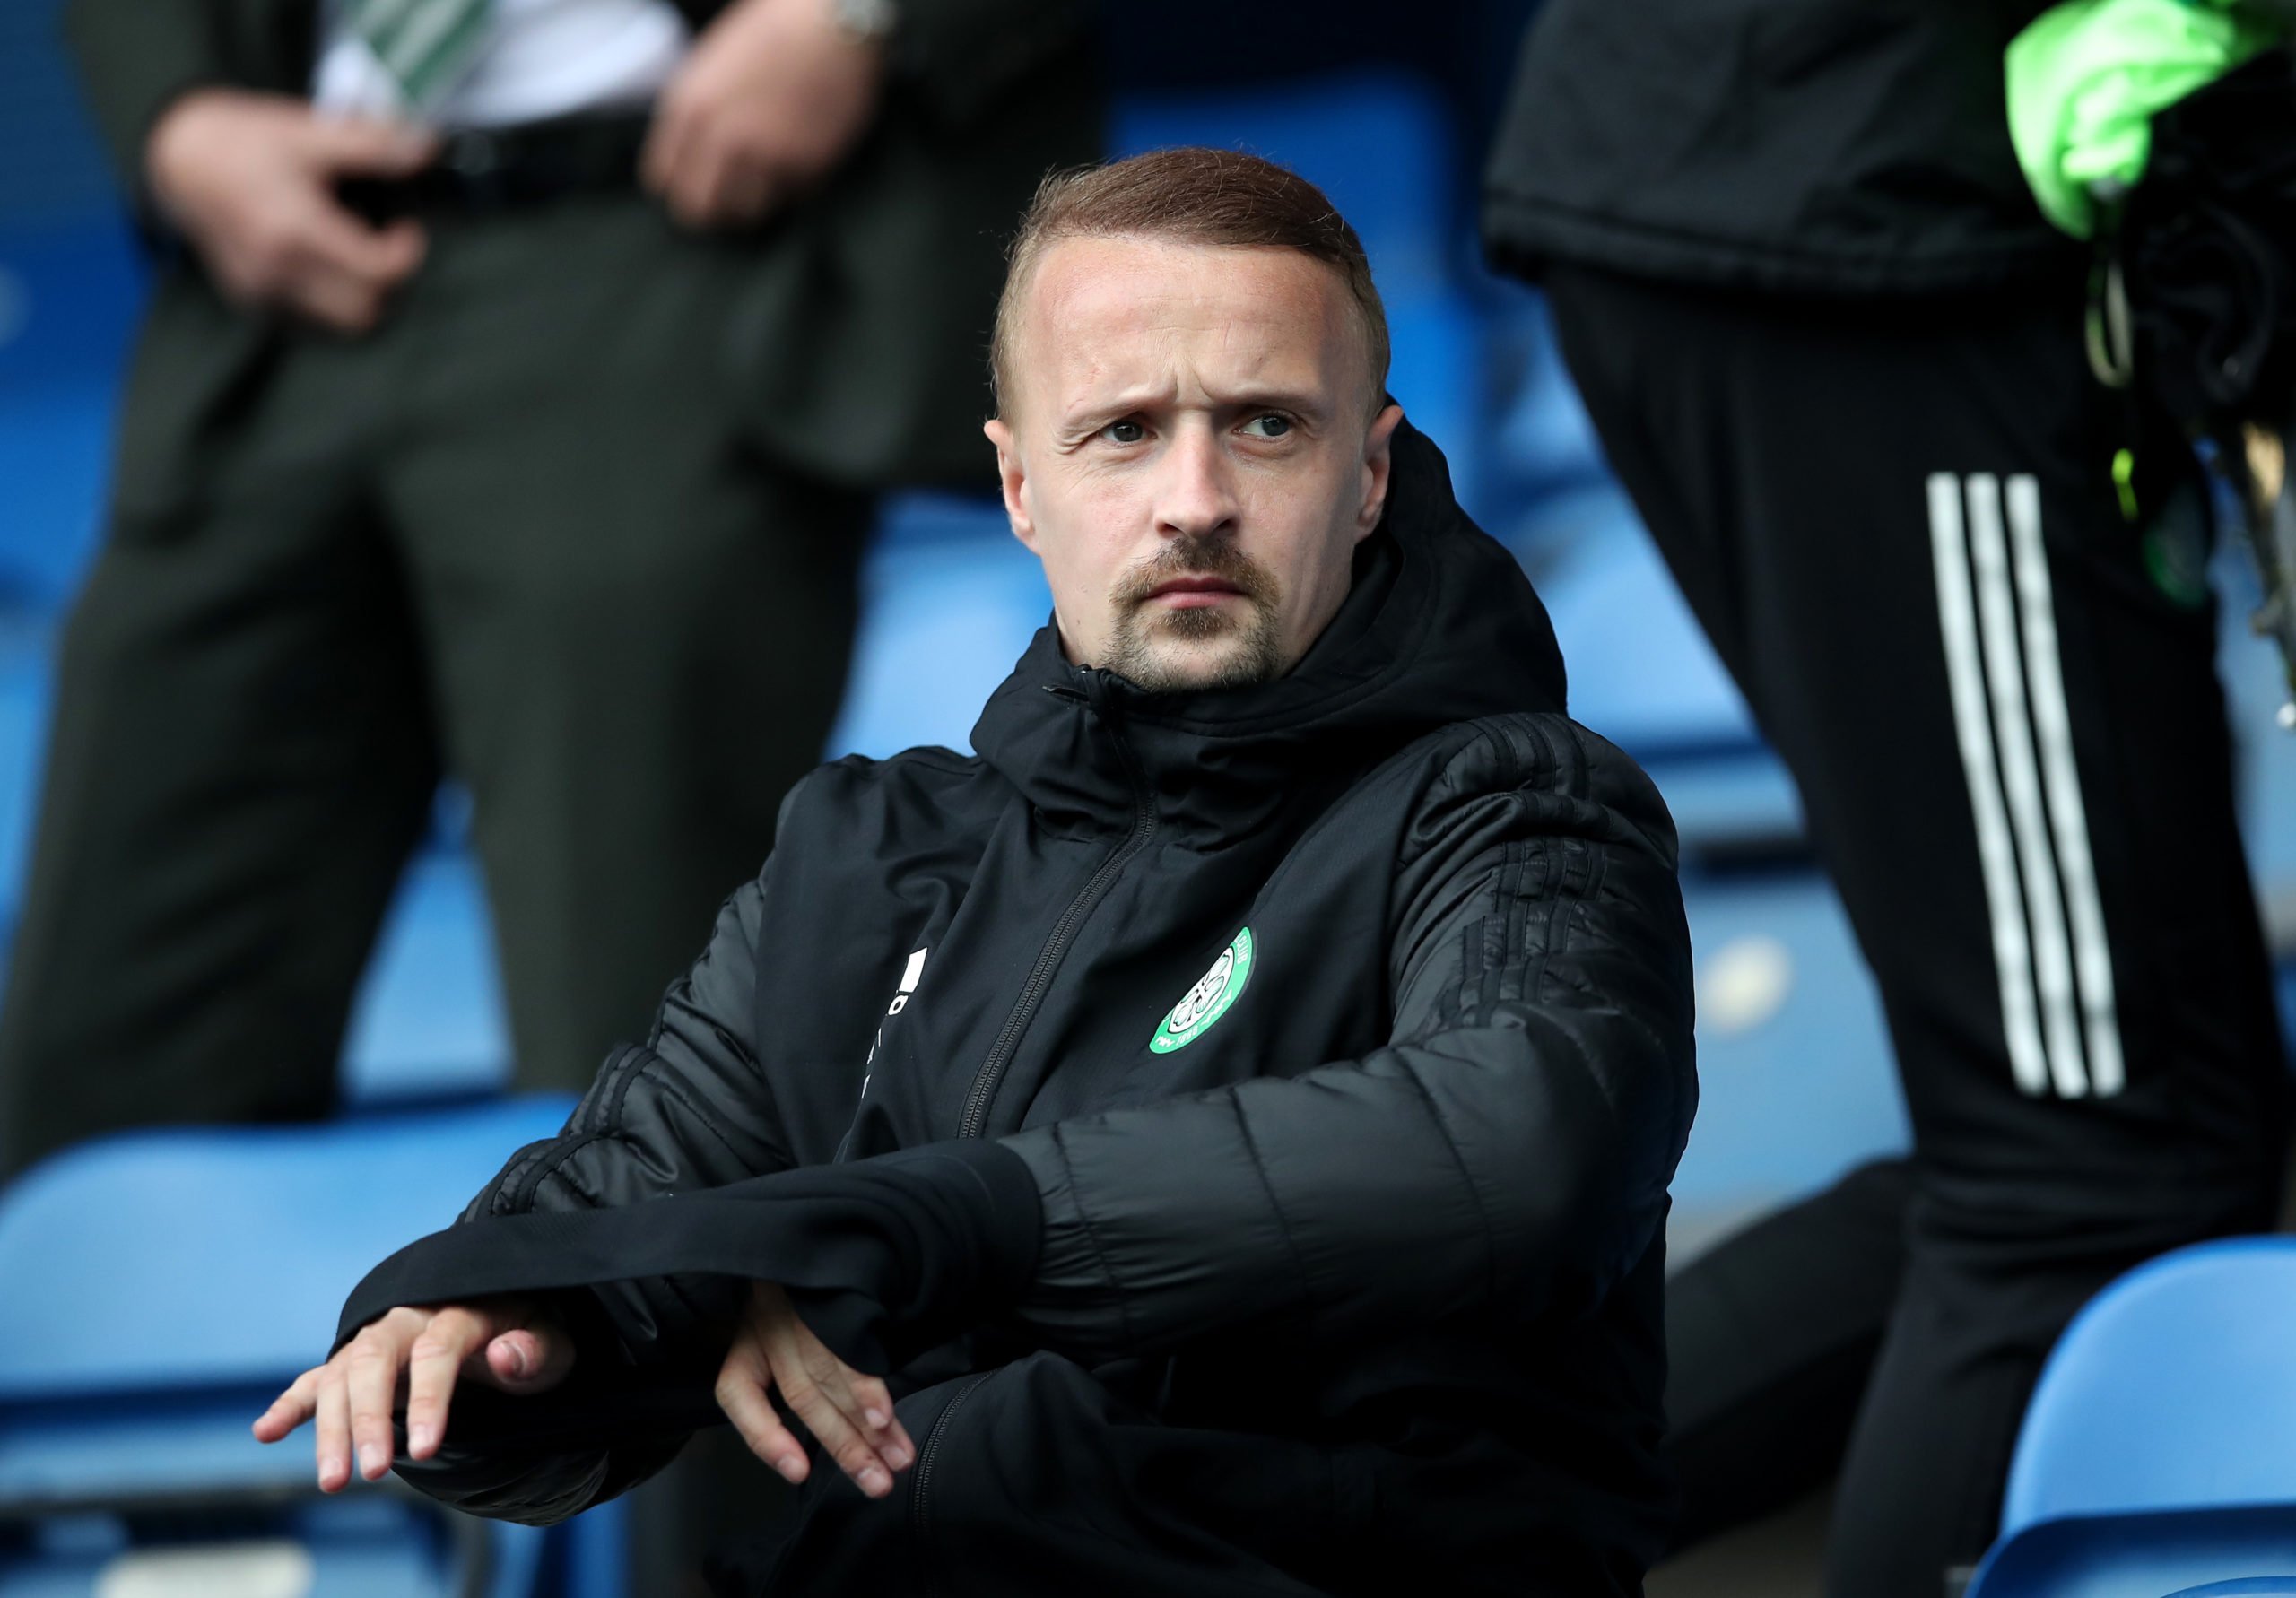 Bad week continues for on-loan Celtic man Leigh Griffiths; subbed off in first half vs rivals